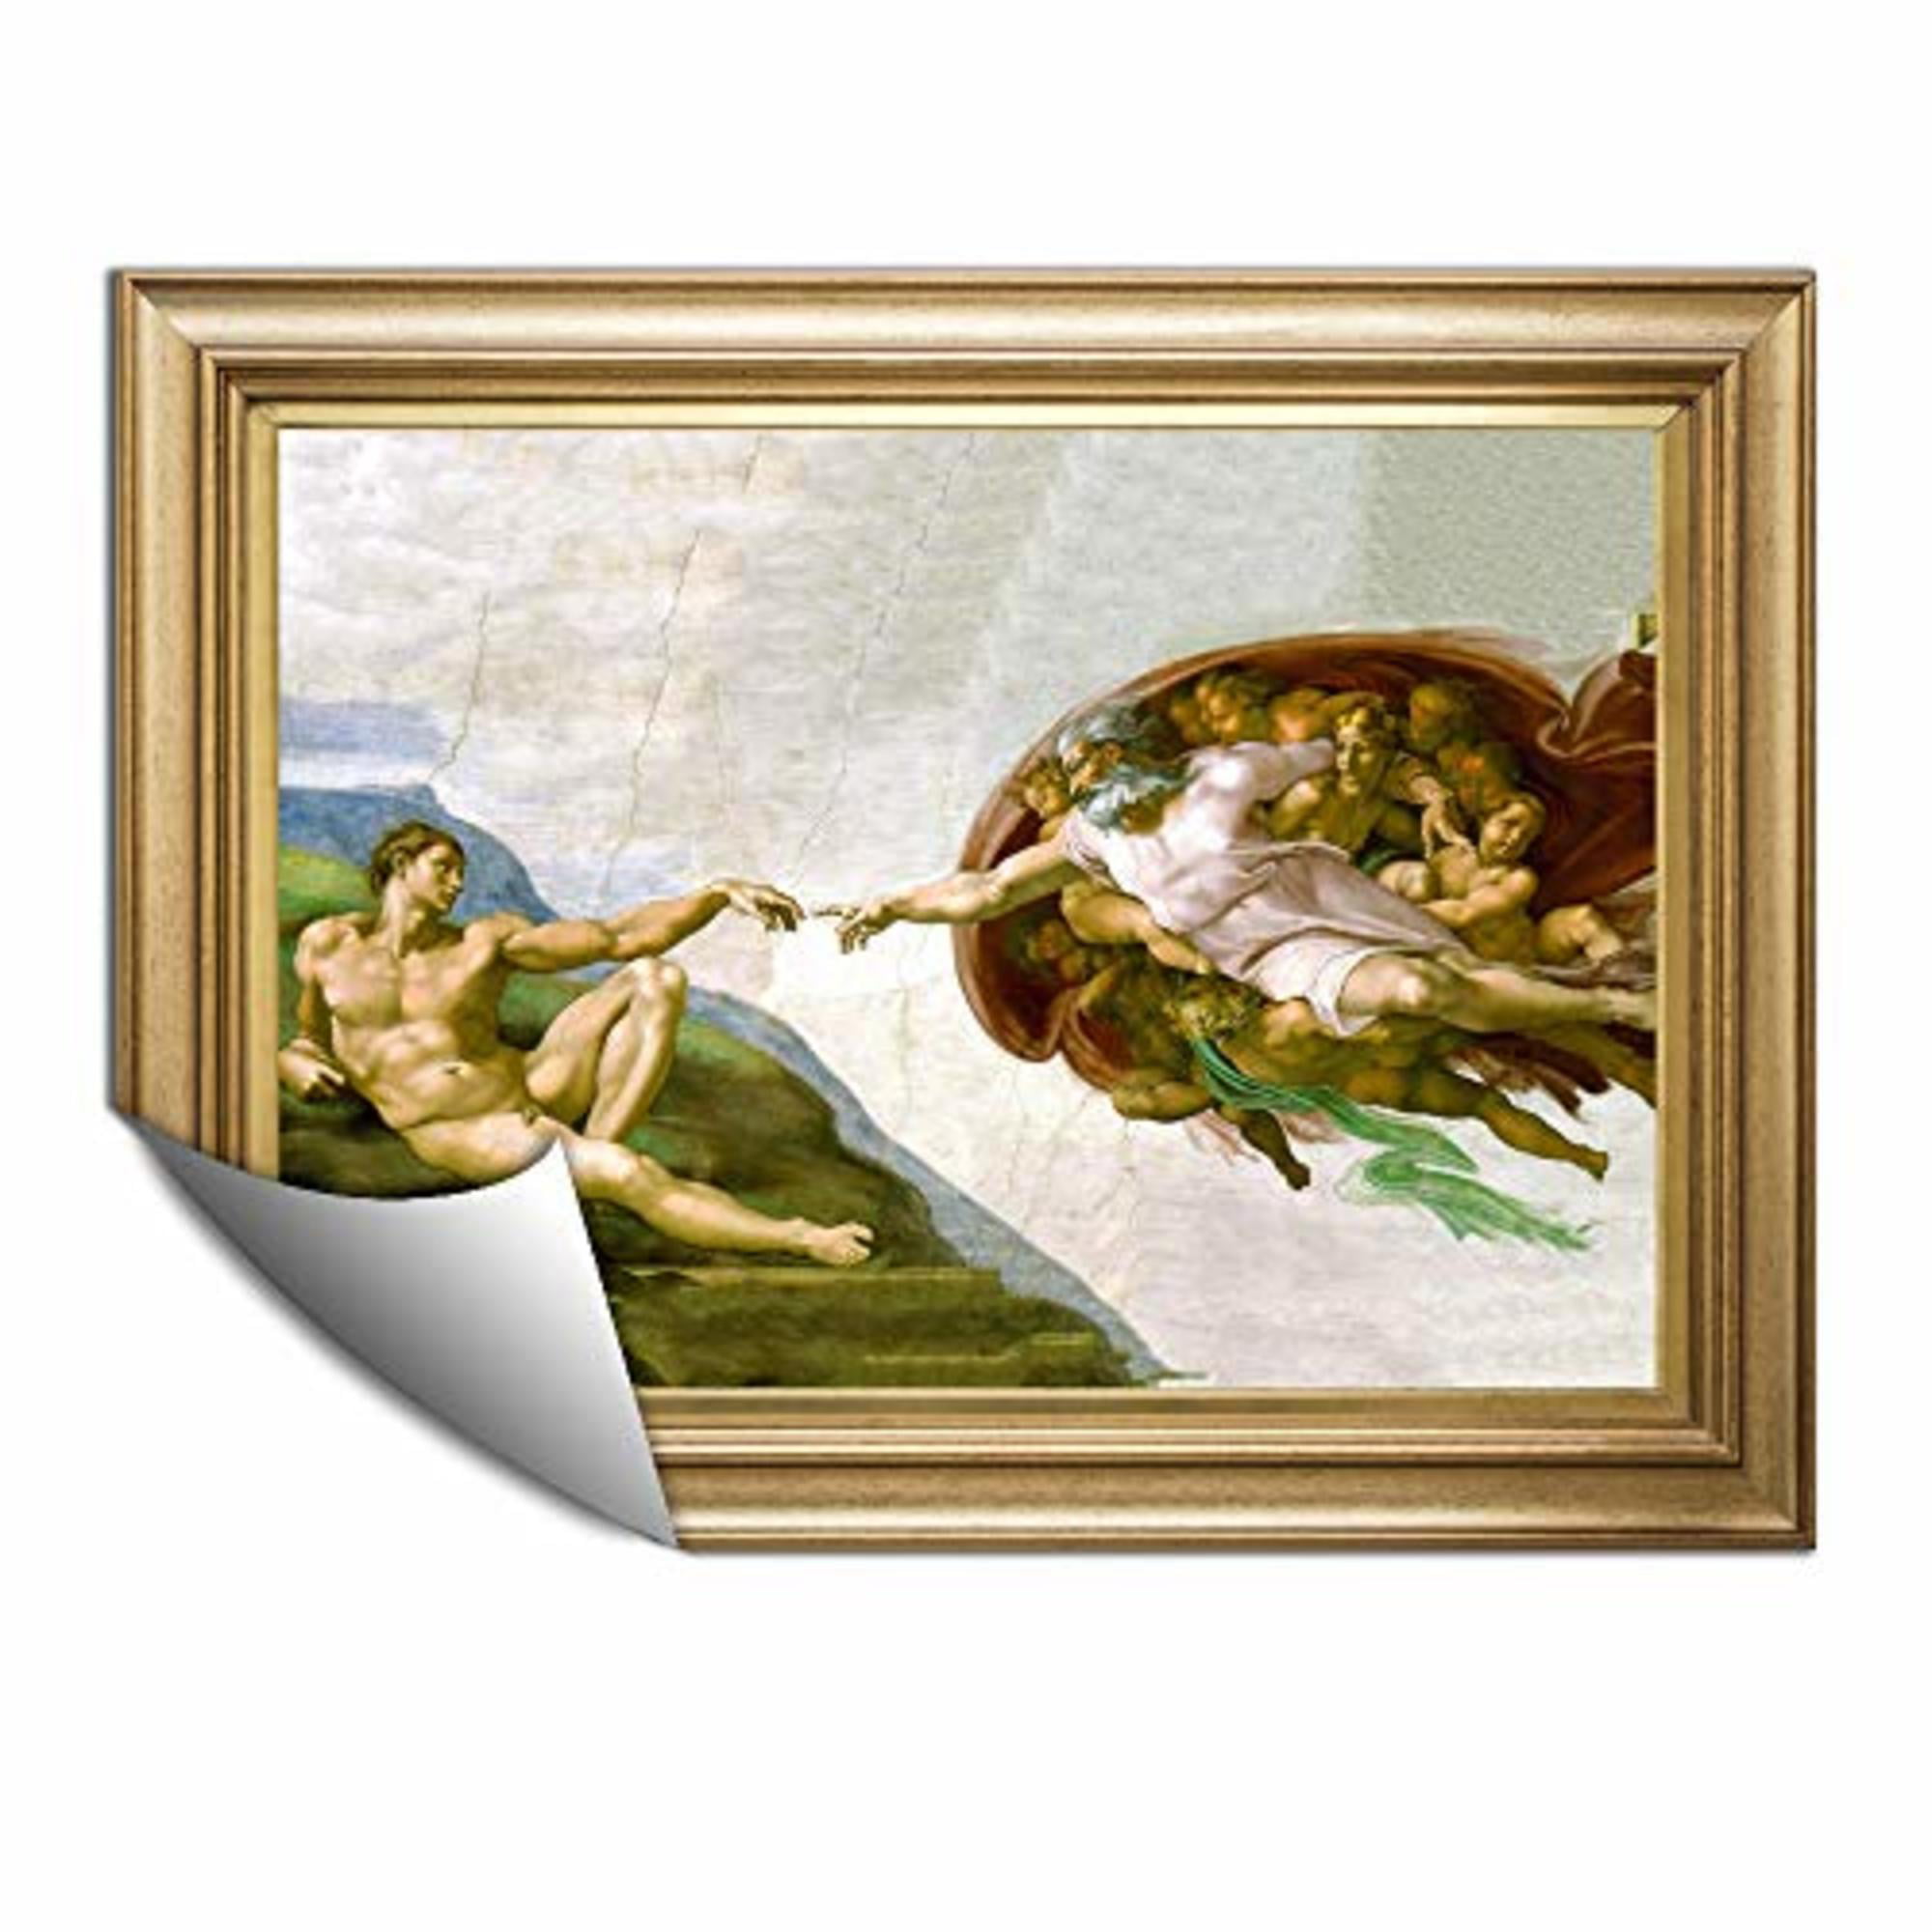 IDEA4WALL The Creation of Adam by Michelangelo Art Prints Wallpaper Large  Wall Stickers for Home Decoration - 24